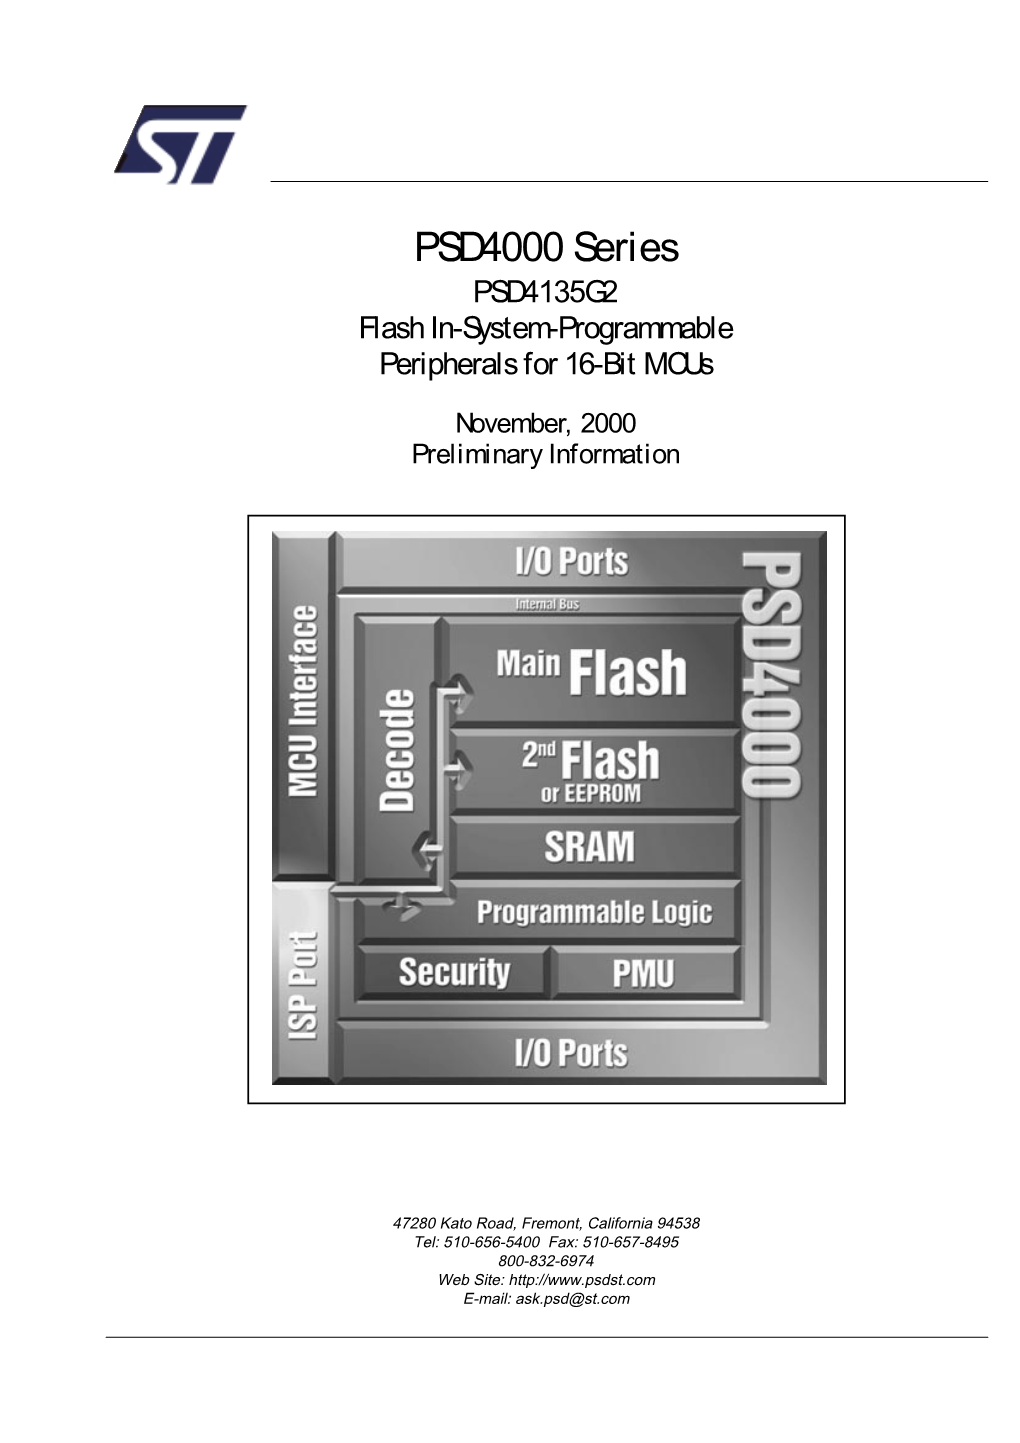 PSD4000 Series PSD4135G2 Flash In-System-Programmable Peripherals for 16-Bit Mcus